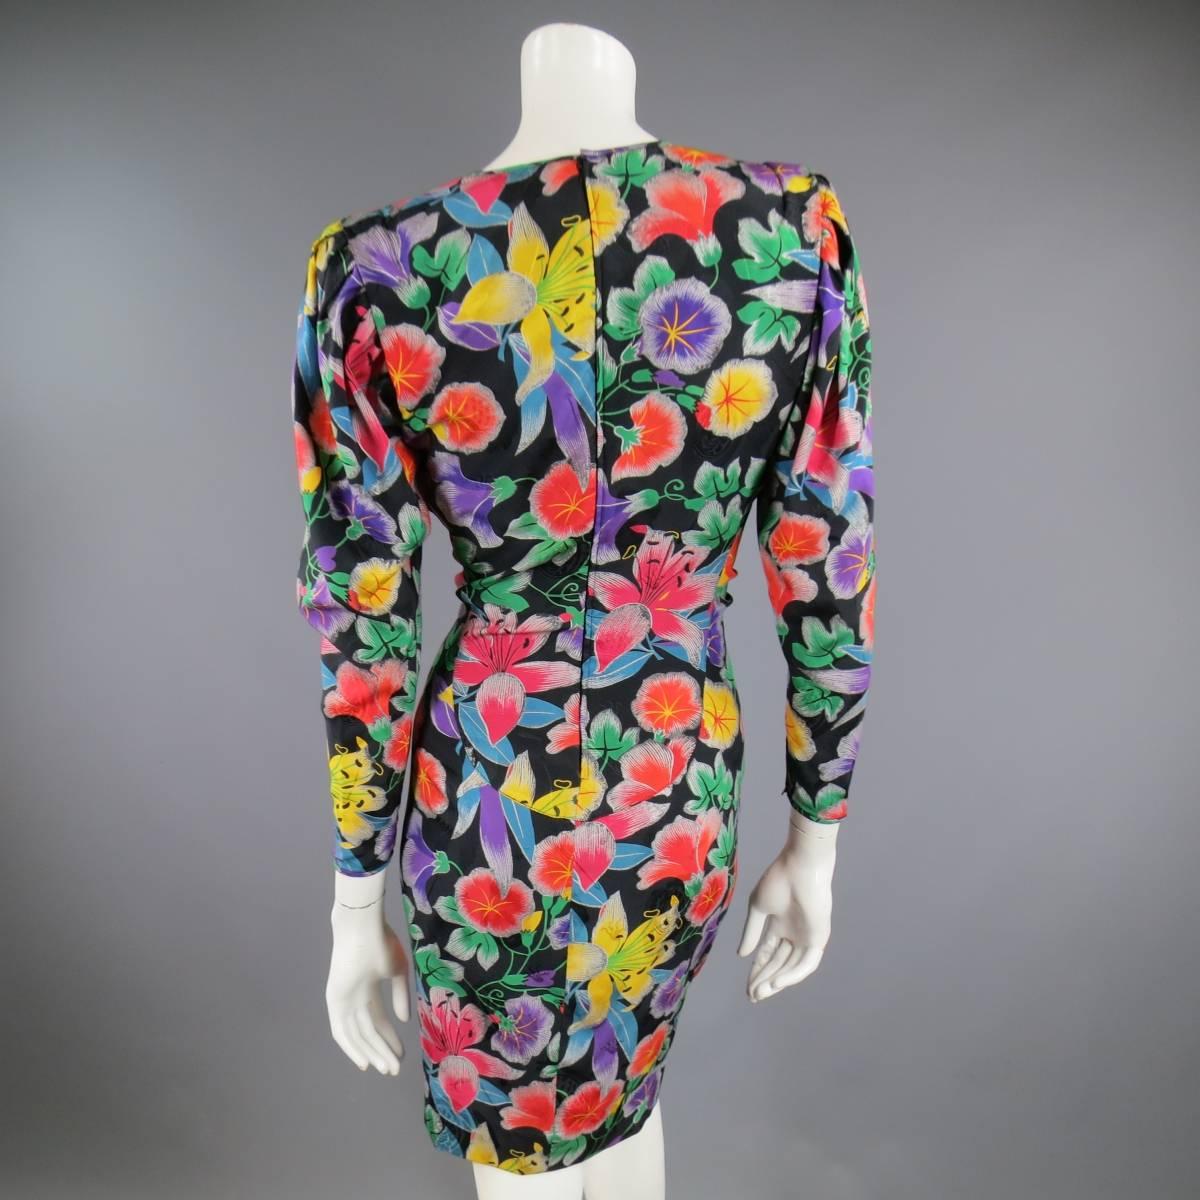 This fabulous vintage EMANUAL UNGARO dress comes in a vibrant multi-color floral on black printed silk and features a V neck, strong, padded shoulder, pleated sleeves, and unique ruched front. Made in Italy.
 
Excellent Pre-Owned Condition.
